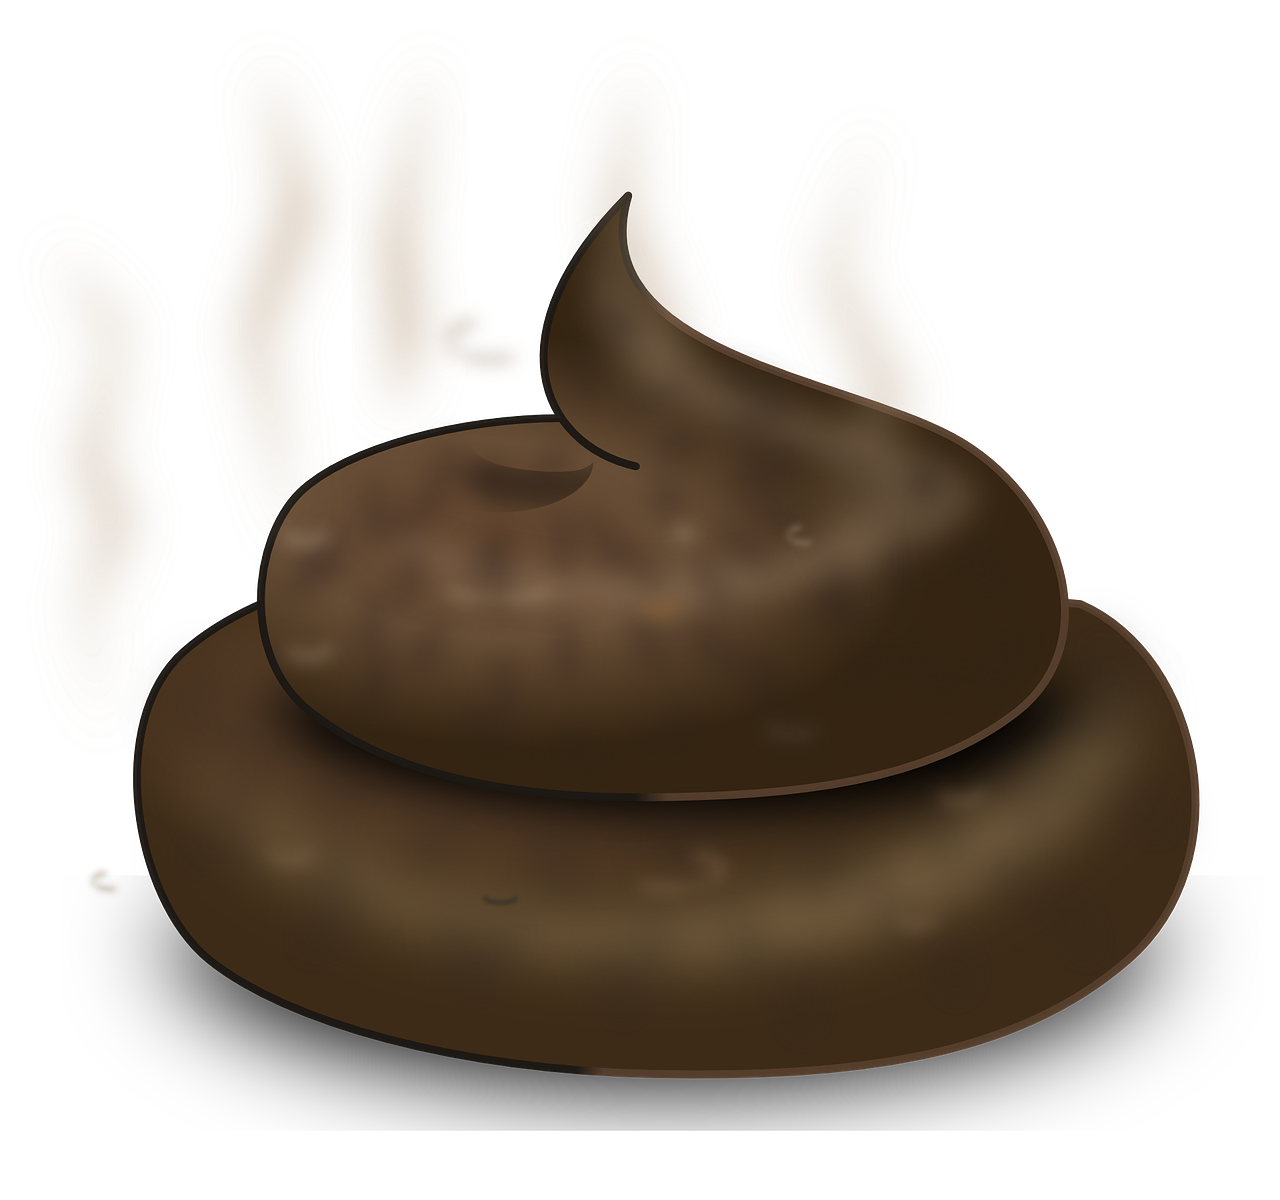 High Quality Turd with transparency Blank Meme Template